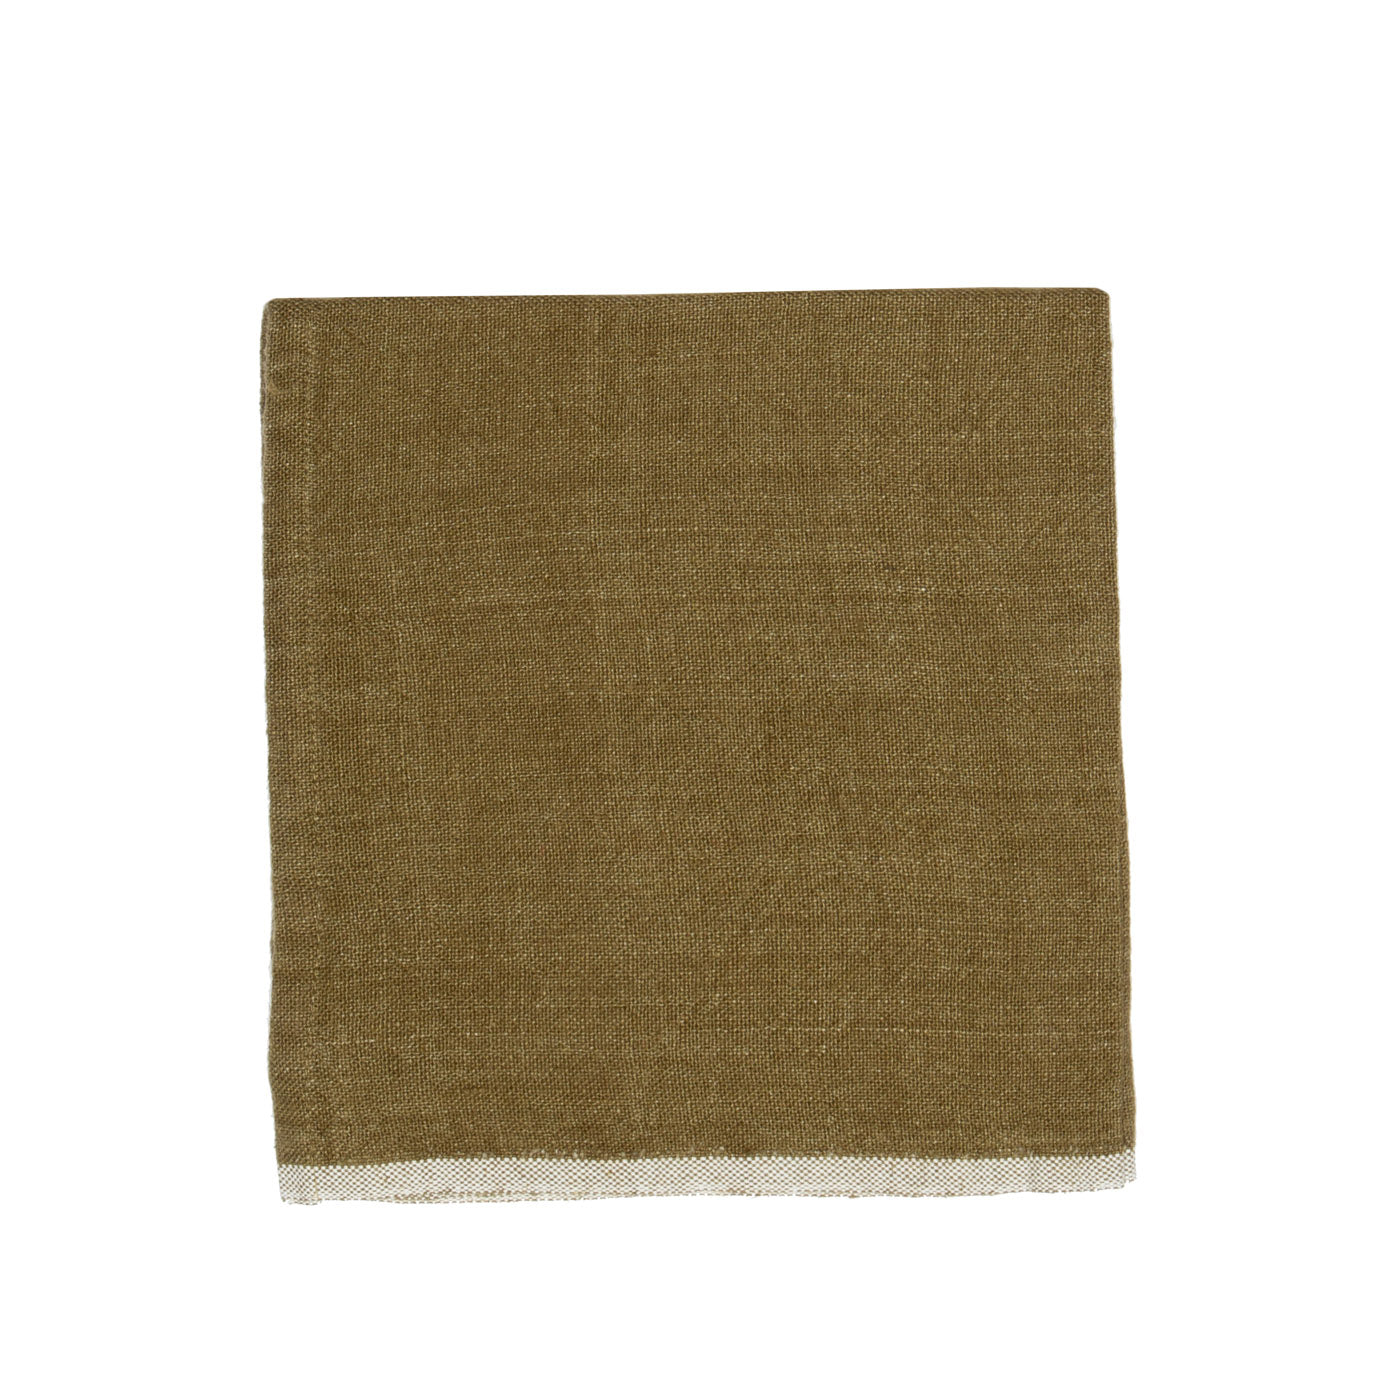 Chunky Linen Forest Green Napkins, Set of 4